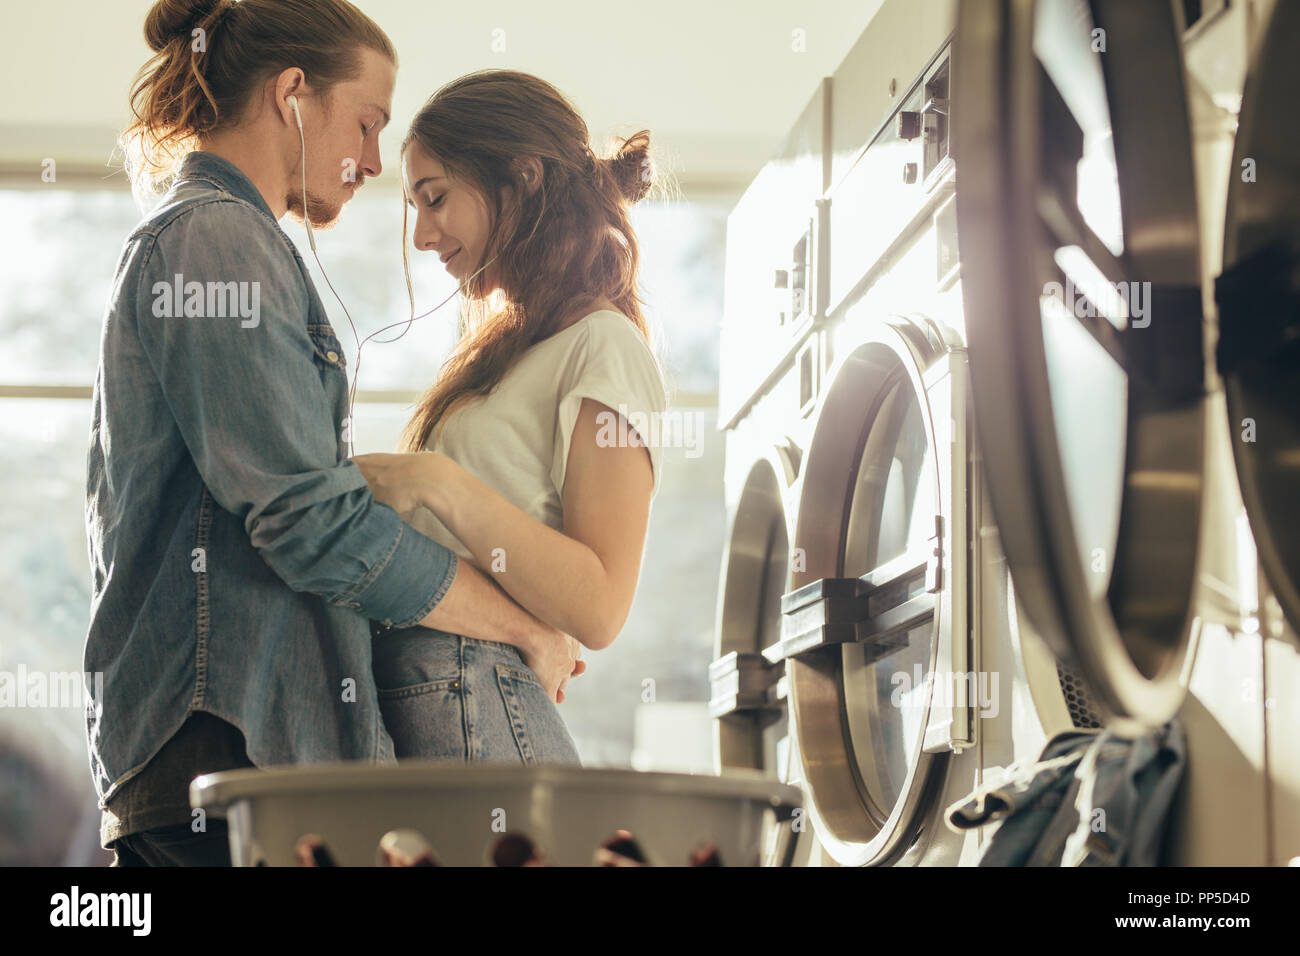 Couple Standing Facing Each Other In A Laundry Room With Closed Eyes Couple Listening To Music